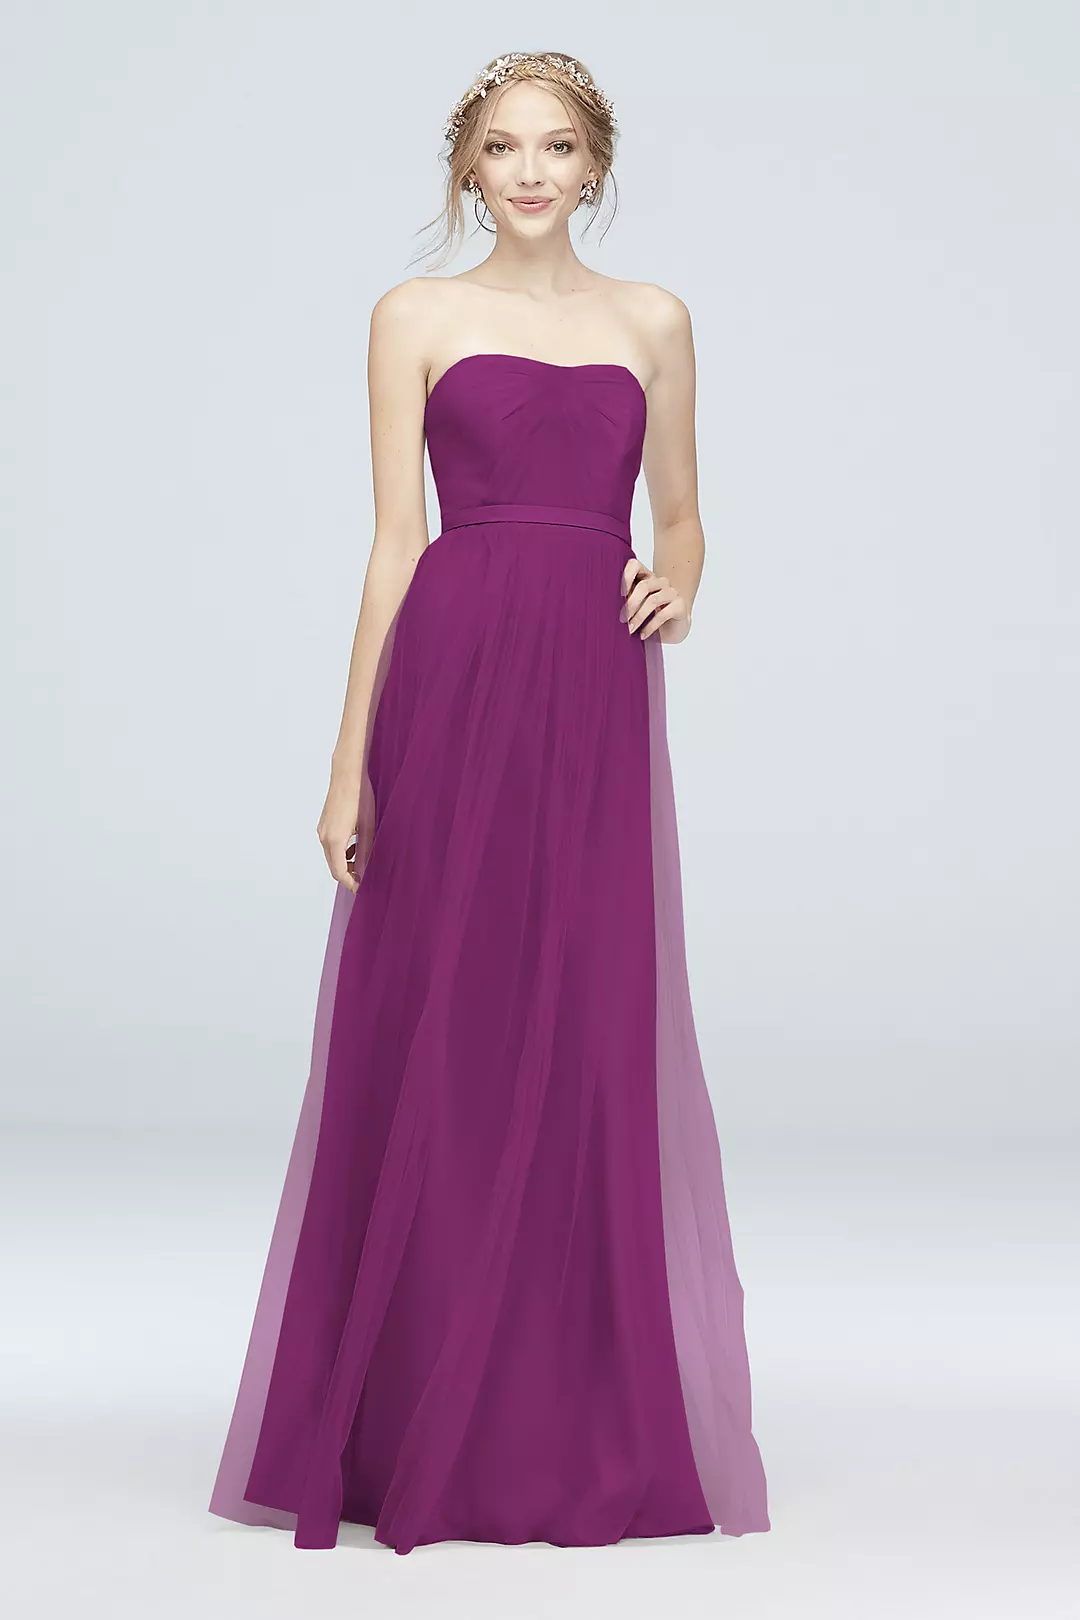 Style-Your-Way 6 Tie Tulle Long Bridesmaid Dress Image